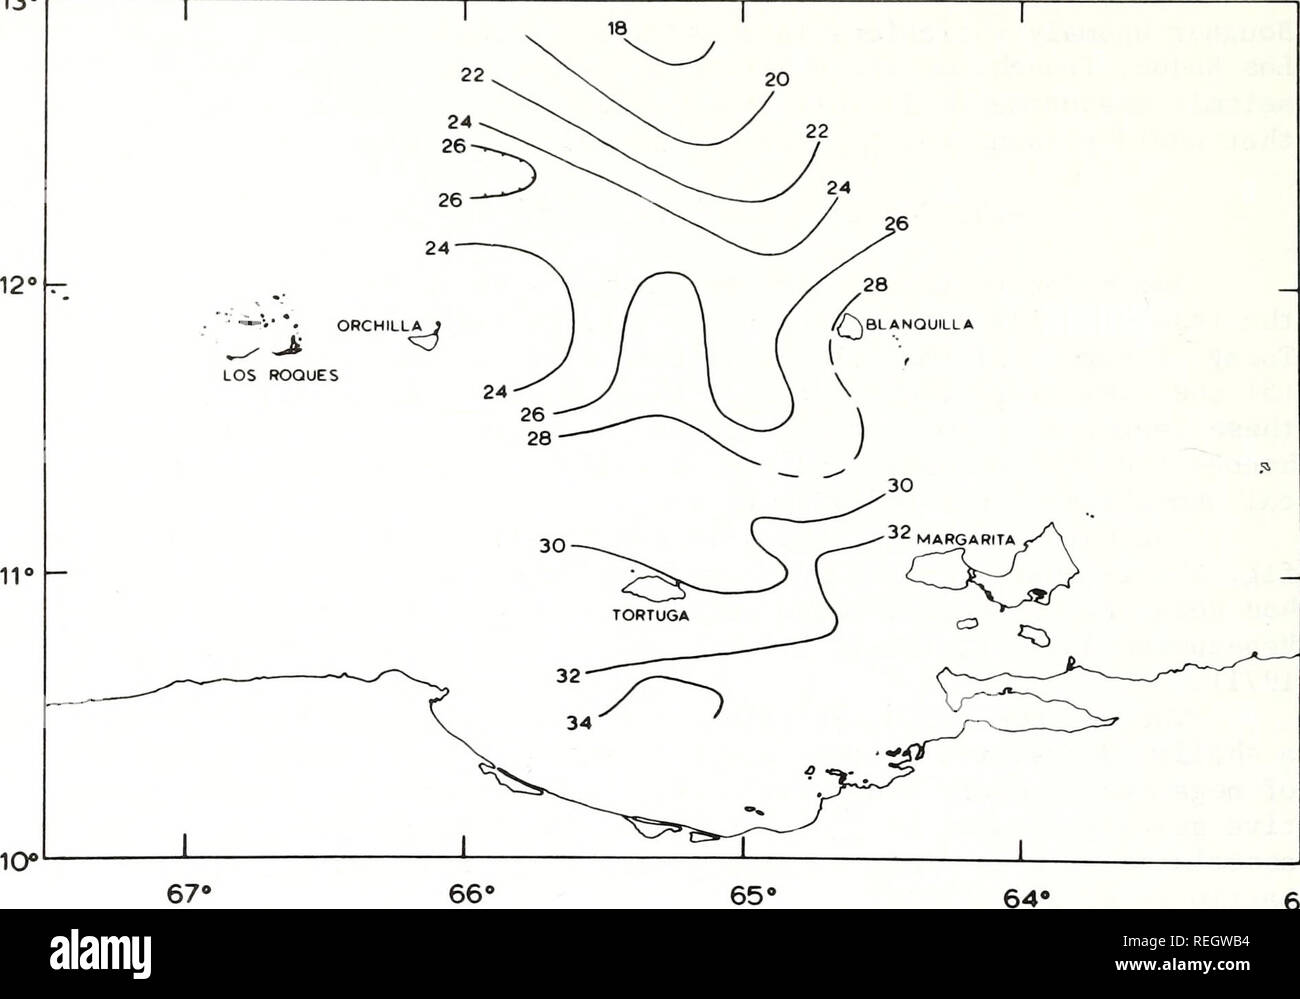 . Collected reprints / Atlantic Oceanographic and Meteorological Laboratories [and] Pacific Oceanographic Laboratories. Oceanography Periodicals.. 13. 63« Figure 44. Contour map of the depth below sea level to the top of the mantle. Contour interval 2 km. tectonic element were noted by Nagle (1971), who, in fact, questions the southwest extension of the volcanic arc on the basis of dissimilarity between the rock types of Grenada (unmetamorphosed Tertiary sediments, basalts, and andesites) and Margarita (highly metamorphosed Jurassic- Cretaceous sediments and intrusives. Another explanation for Stock Photo